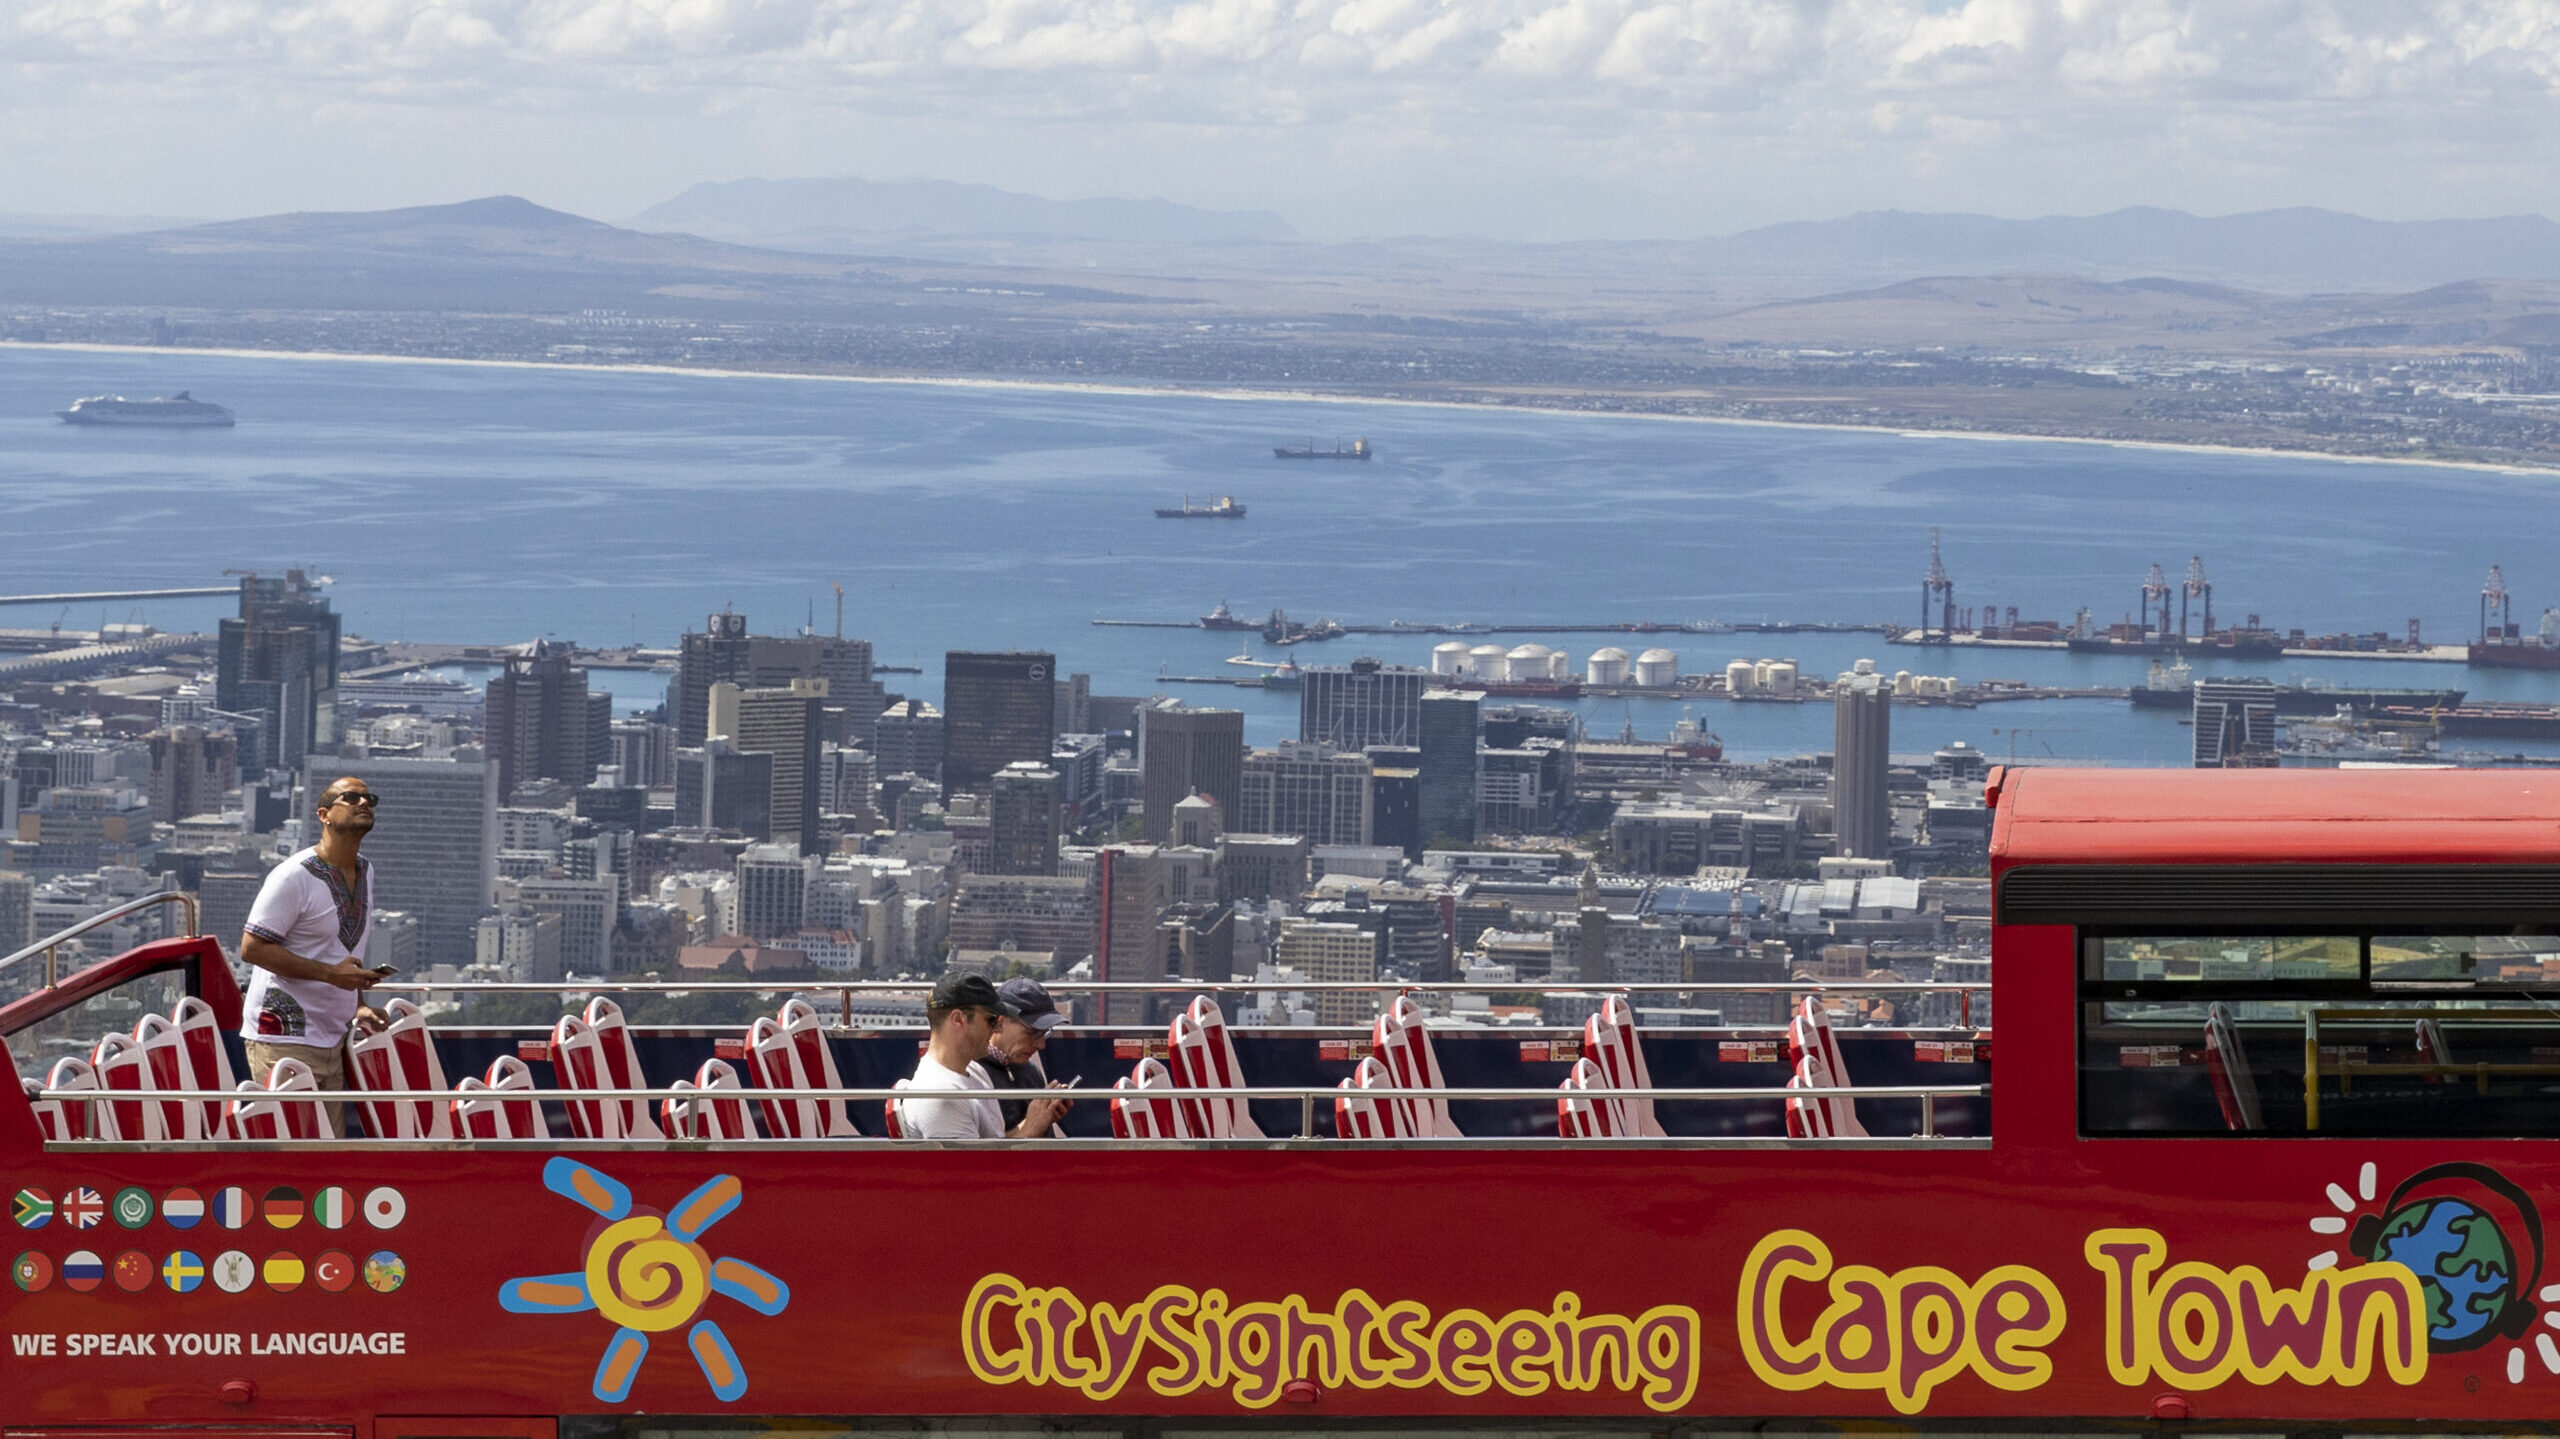 An open-air double decker sightseeing bus stops on the slopes of Table Mountain, overlooking the ci...